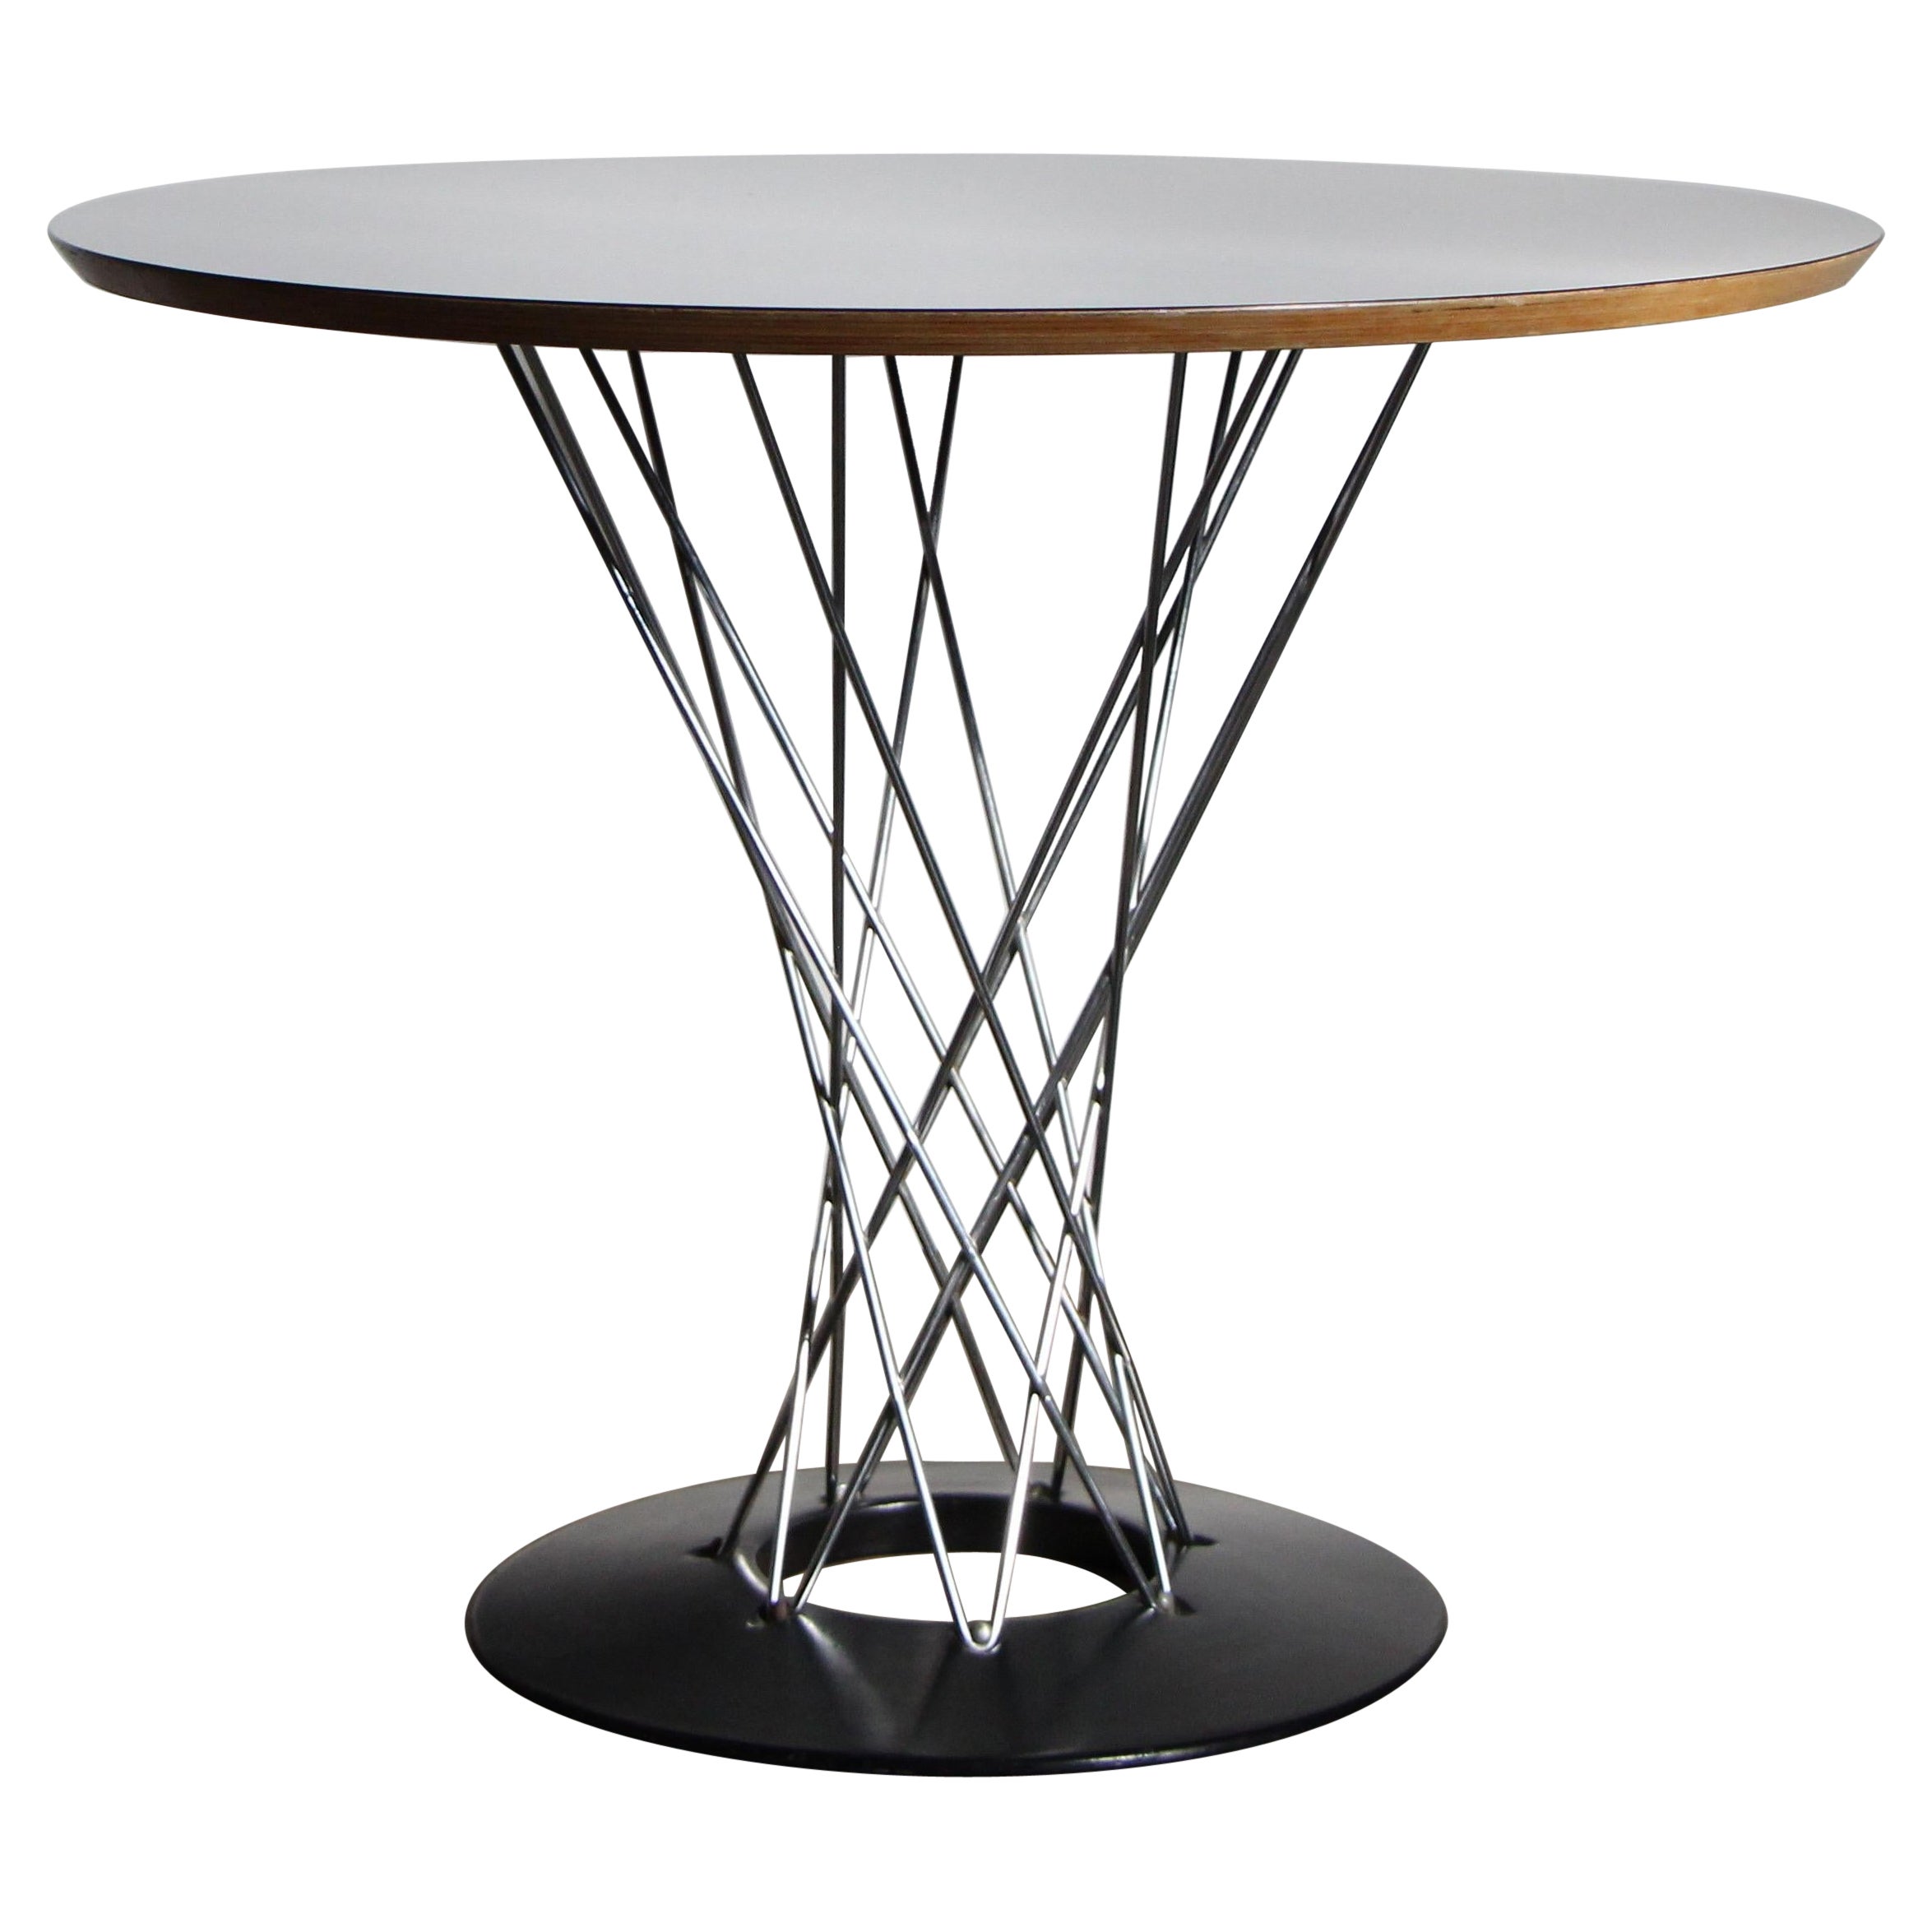 Vintage Isamu Noguchi "Cyclone" Table for Knoll, circa 1960s For Sale